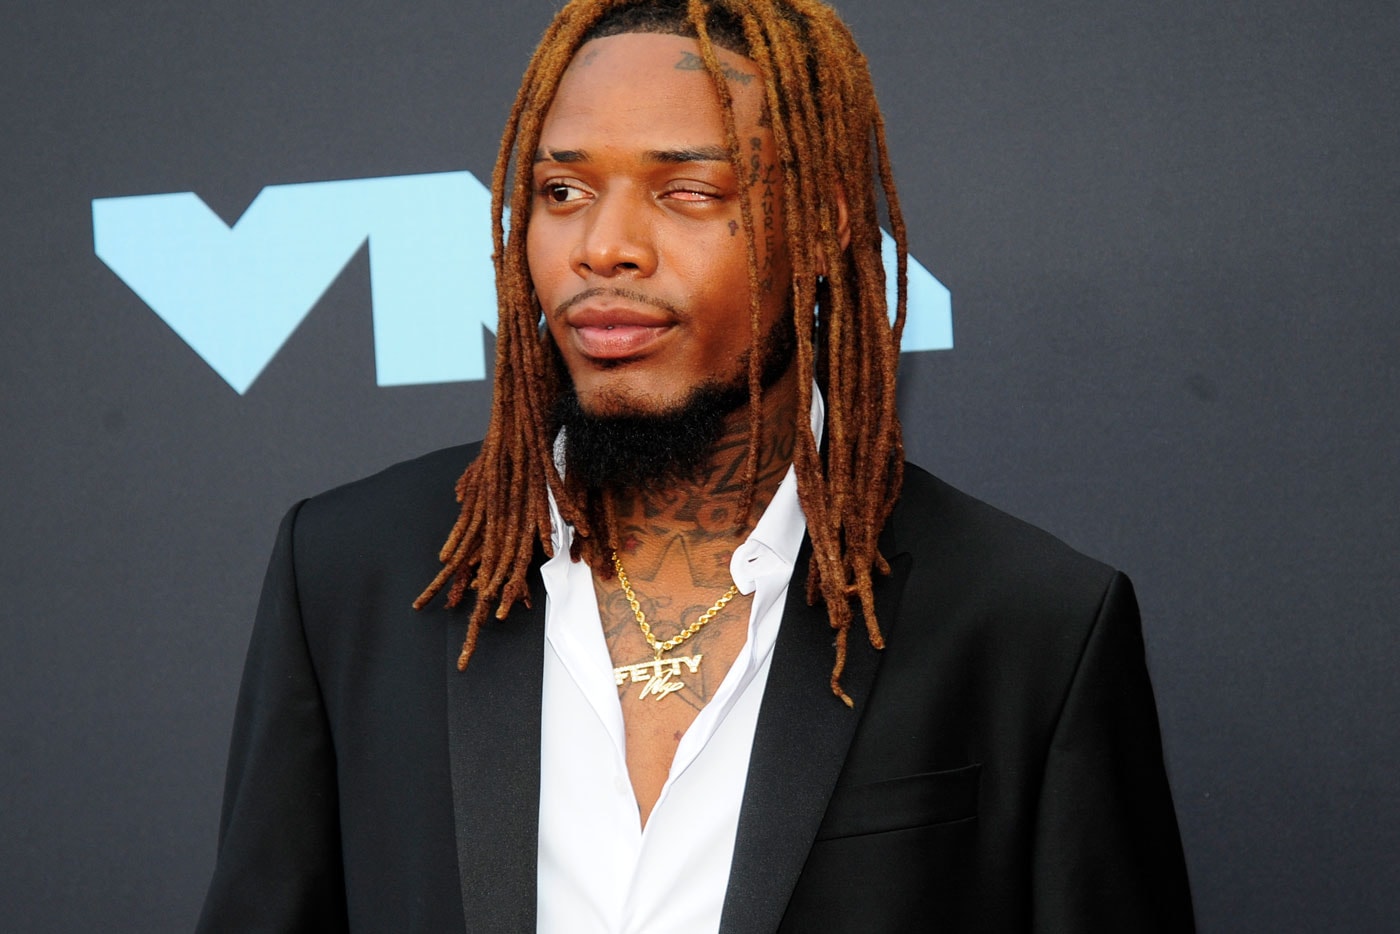 Why Fetty Wap Chooses to Go Without a Prosthetic Eye